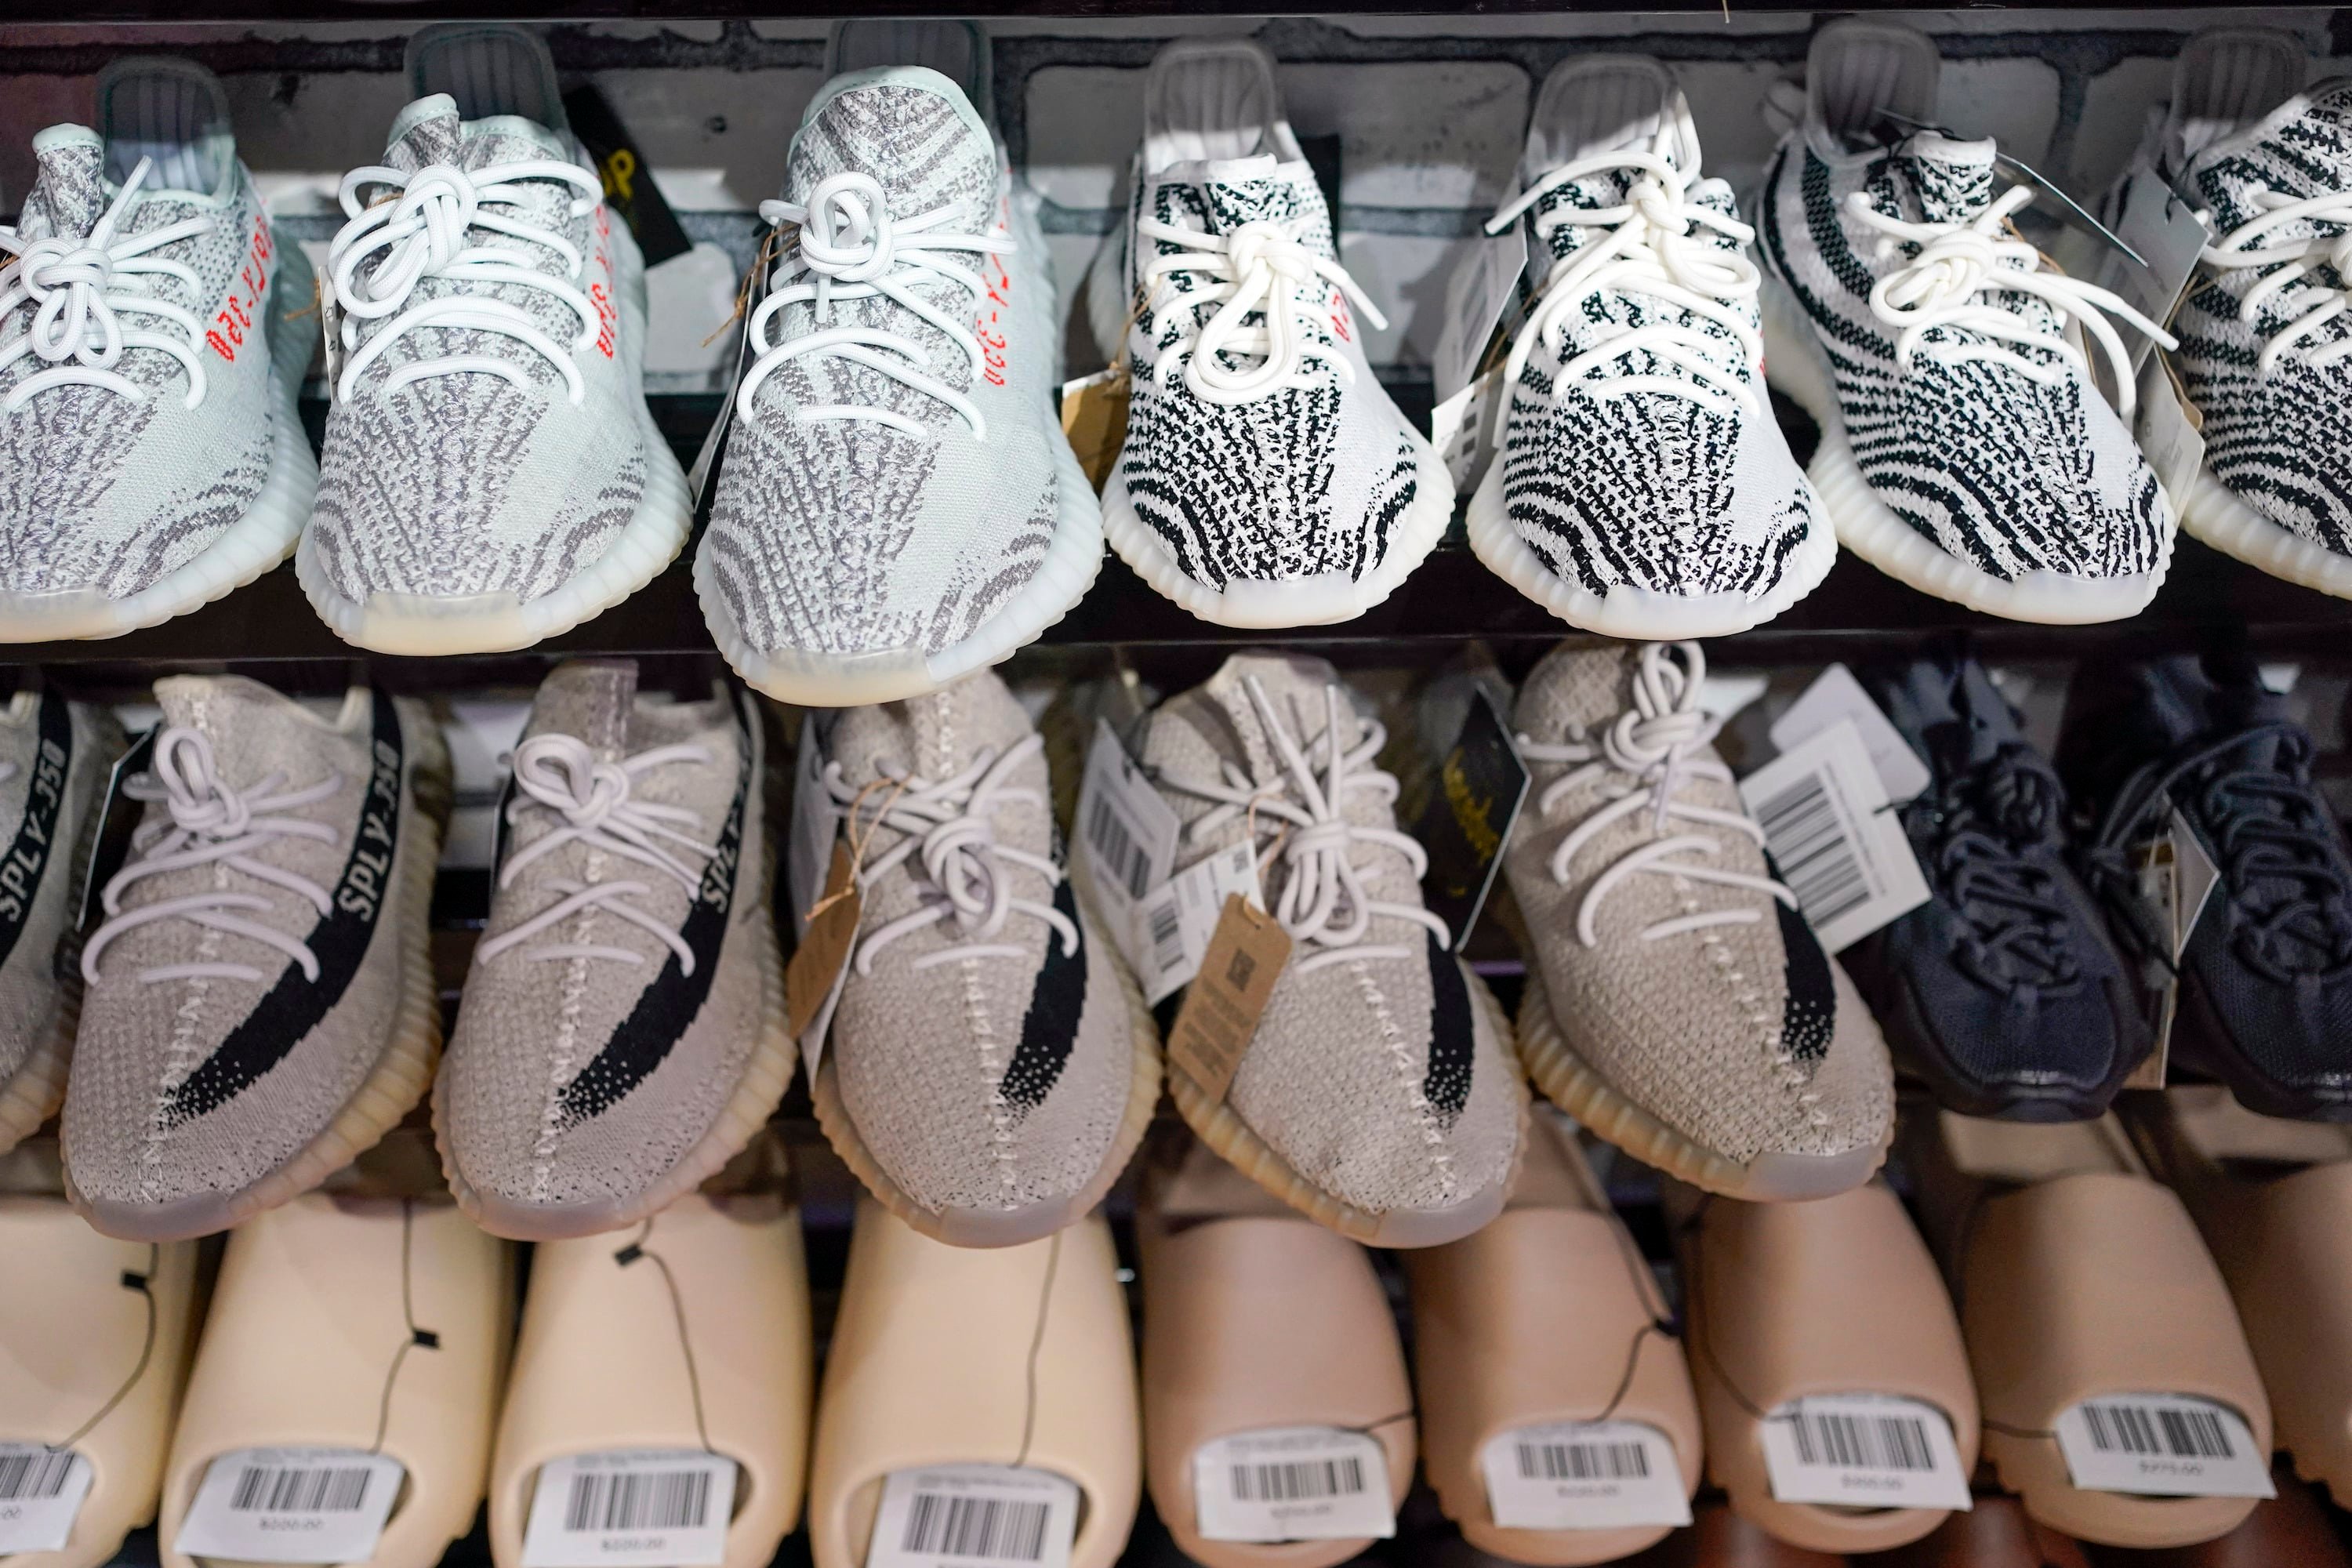 Adidas to release second batch of Yeezy sneakers after breakup with Ye |  Courthouse News Service